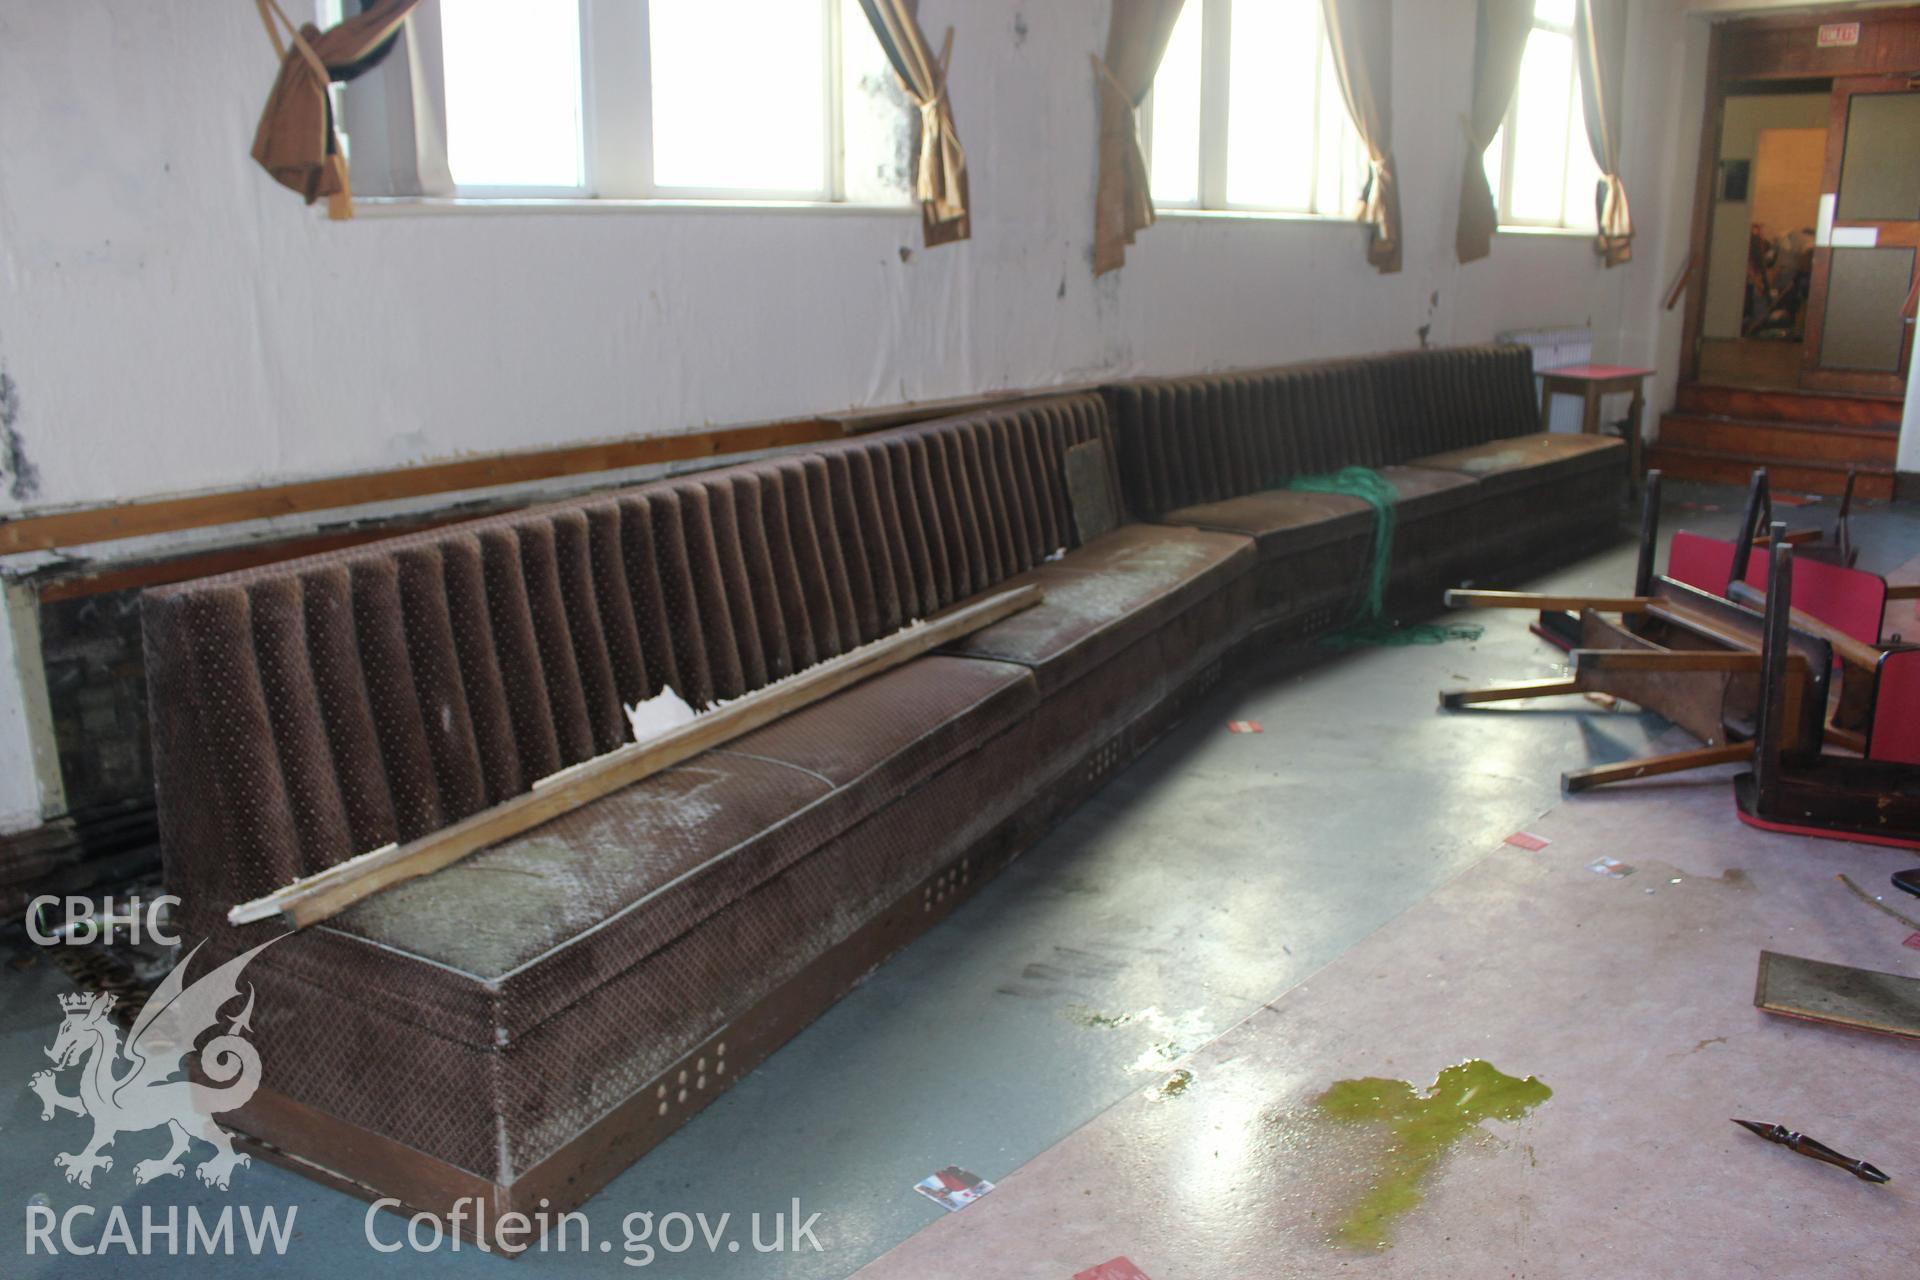 Interior view of seating at the Railway Institute, Bangor. Photographed during survey conducted by Sue Fielding for the RCAHMW on 4th April 2016.